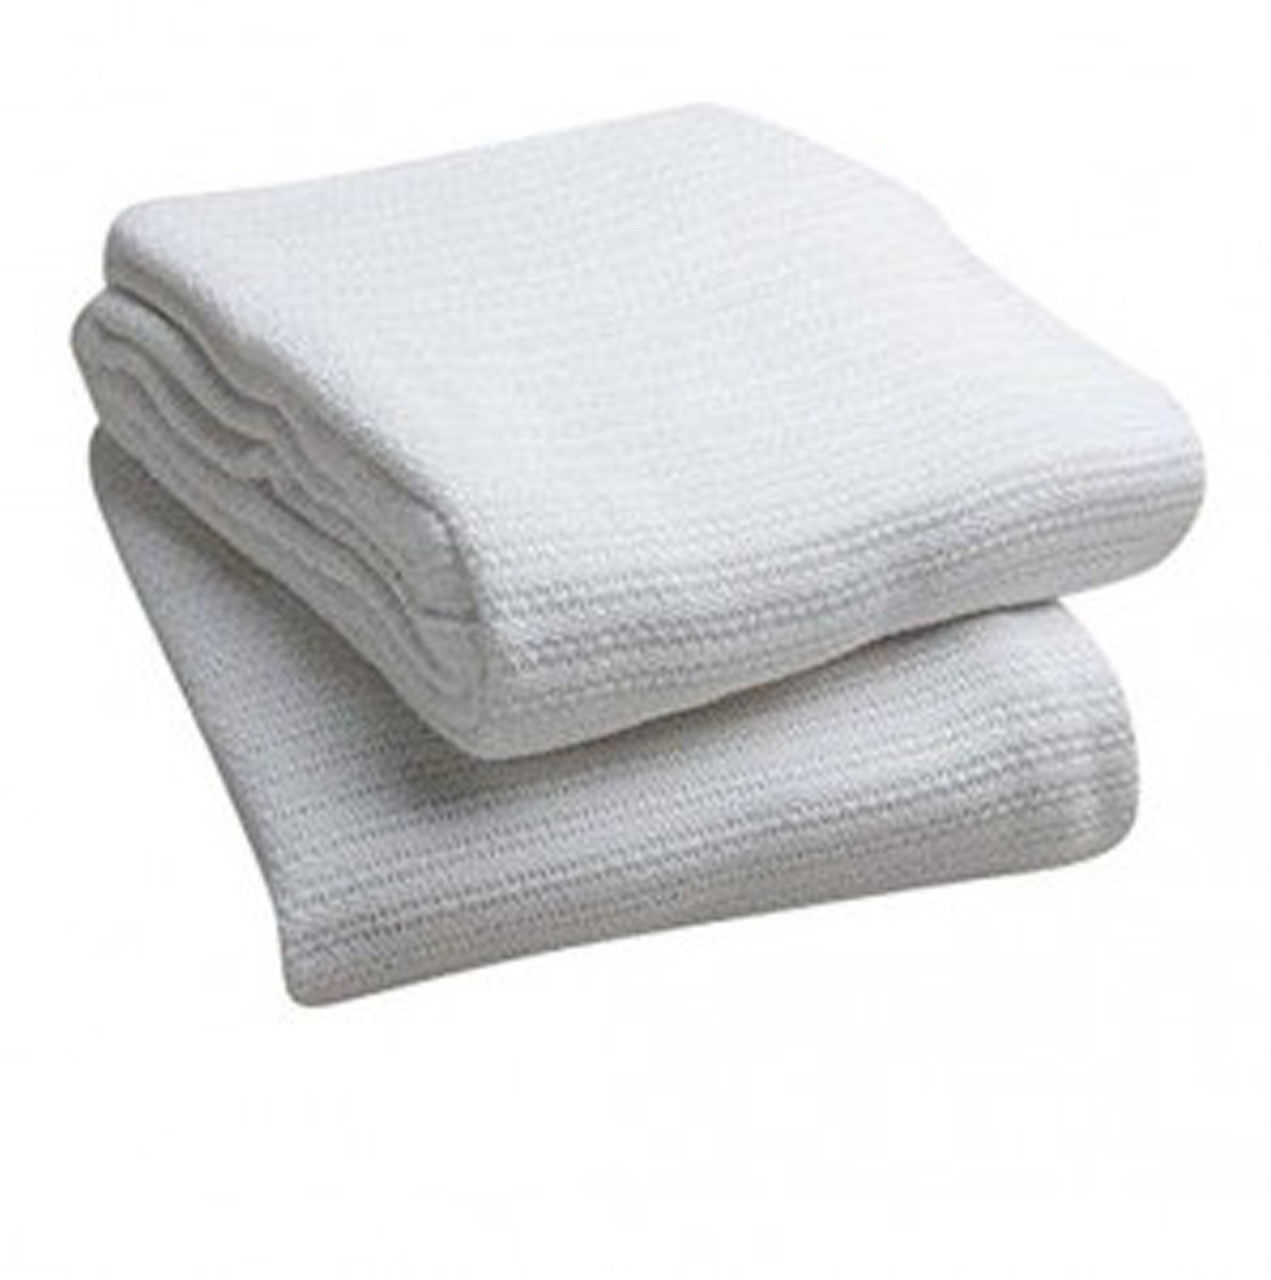 Are the Open Weave Thermal Blanket considered commercial grade?